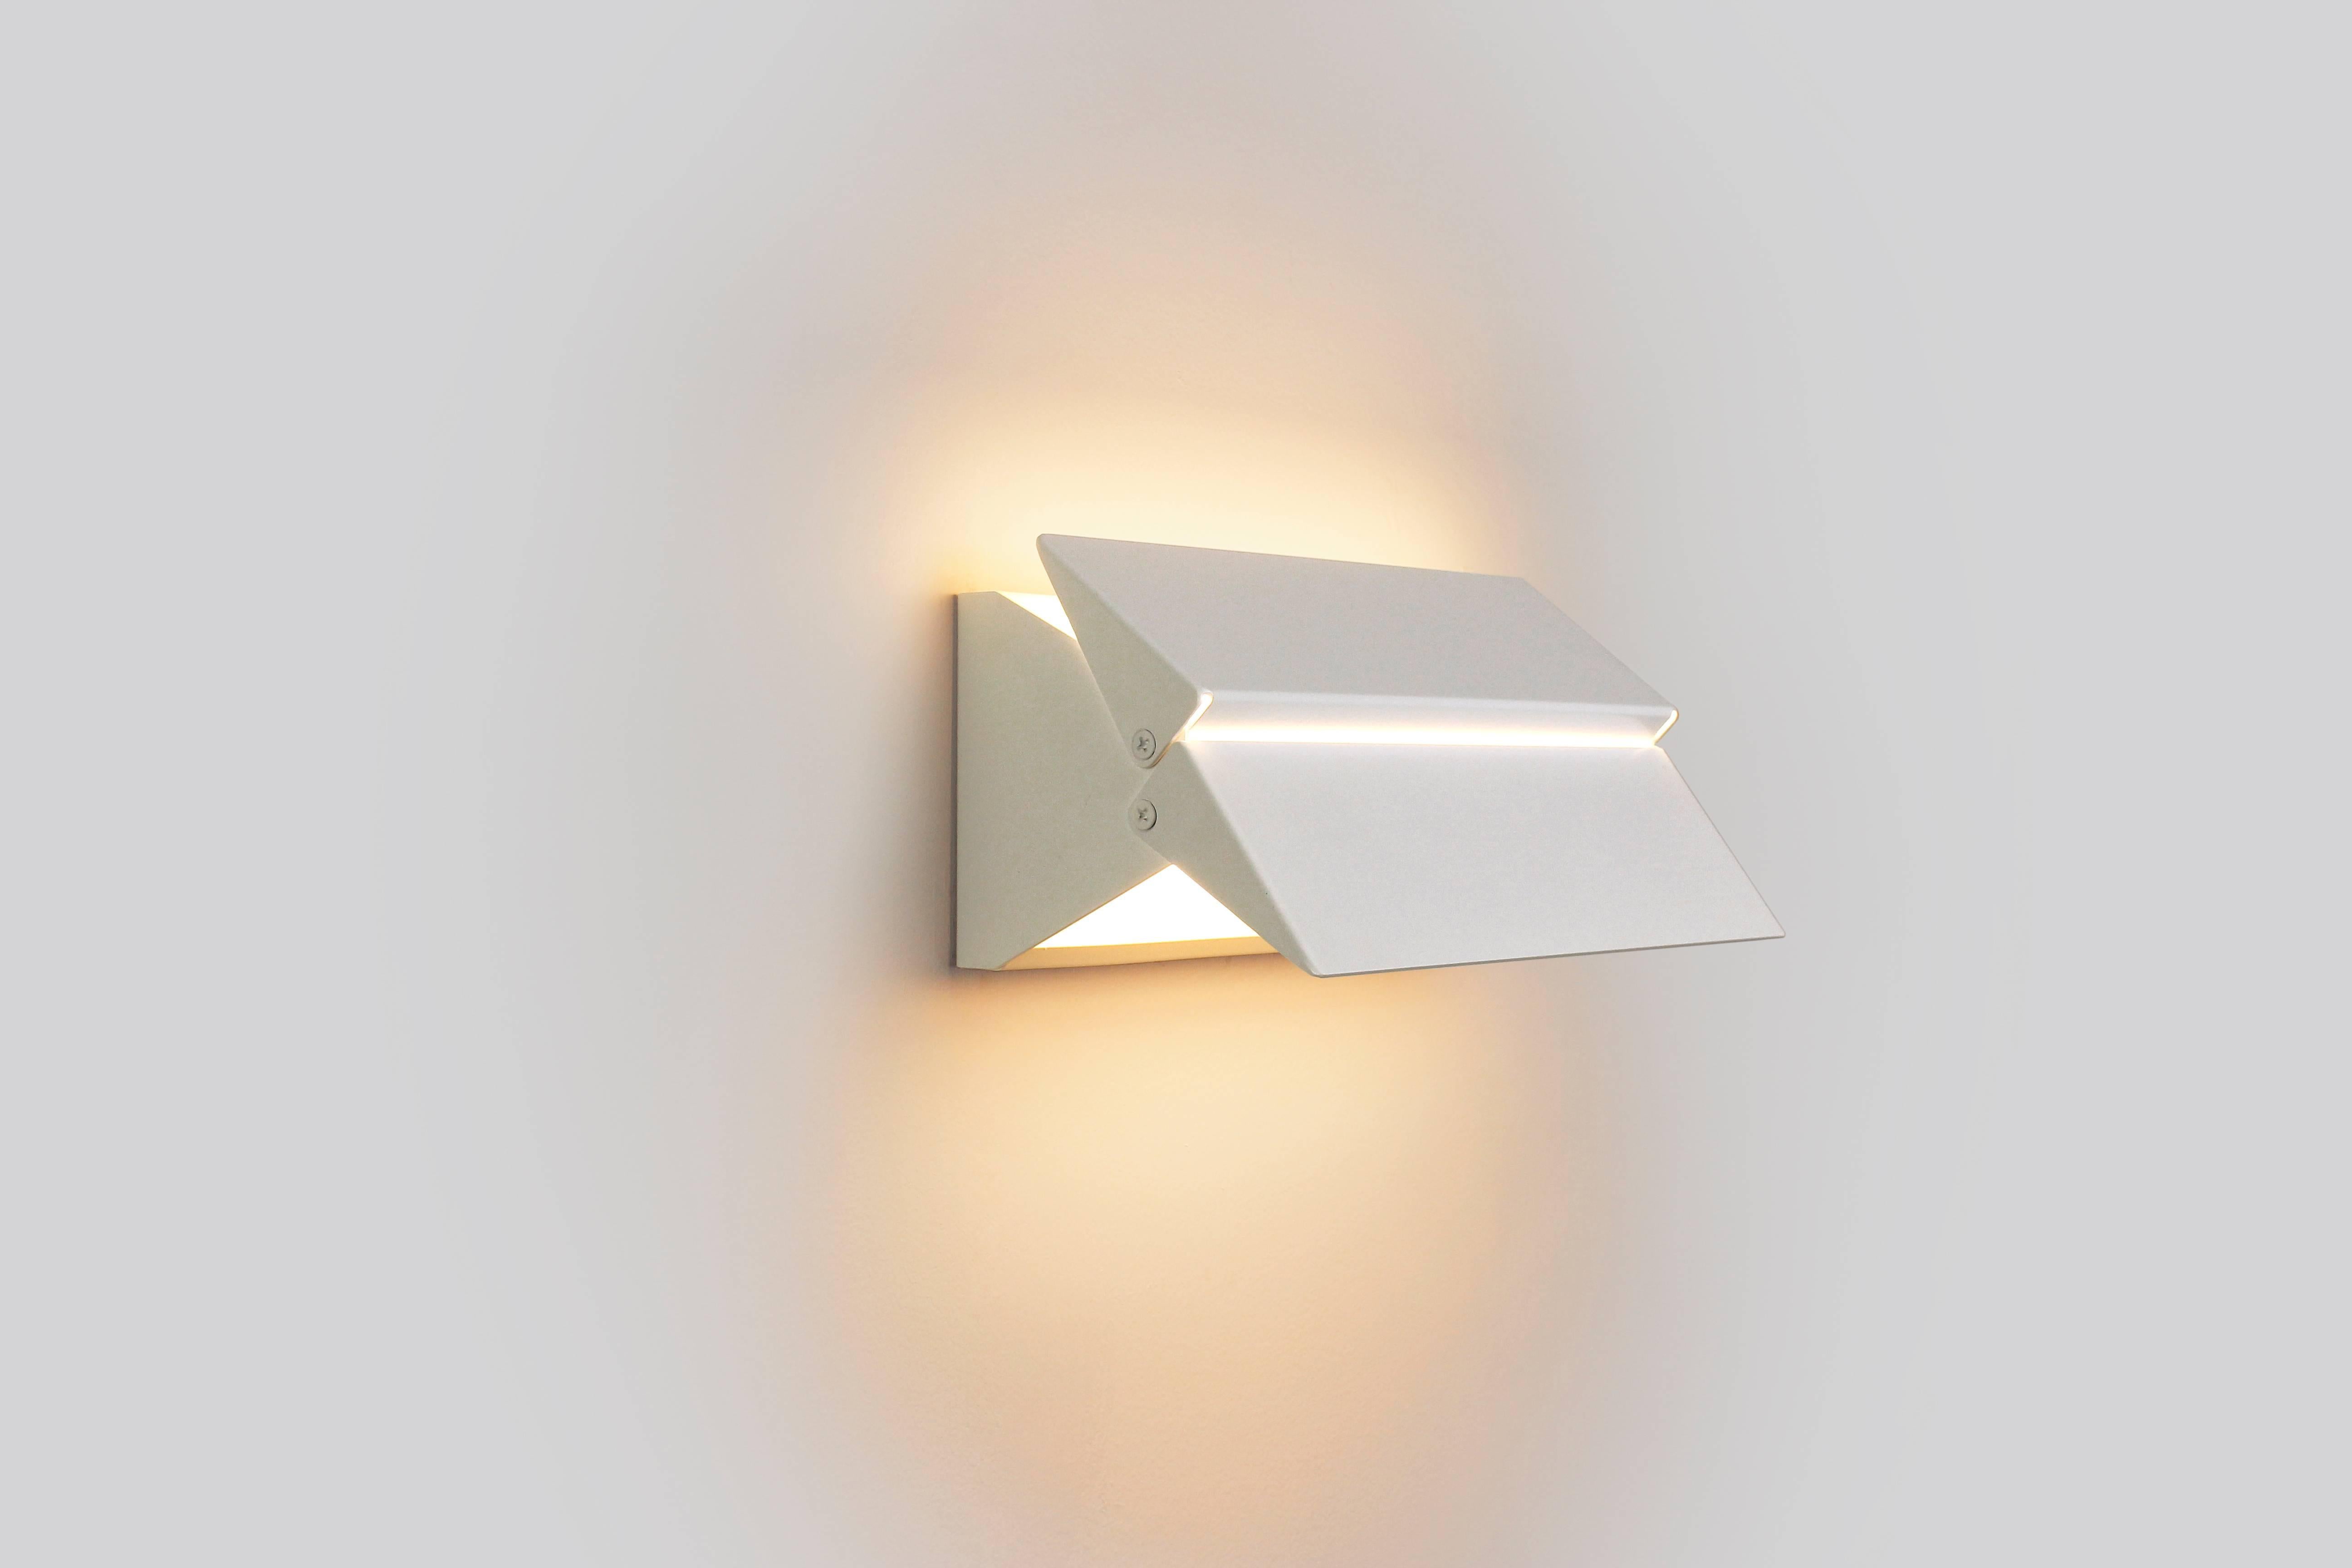 The Ada sconce gets its name and its raison d’être from the Americans with Disabilities Act (ADA), which dictates that hallway sconces must not protrude from the wall more than 4”. 

Solid sheet metal construction and modern LED technology make this